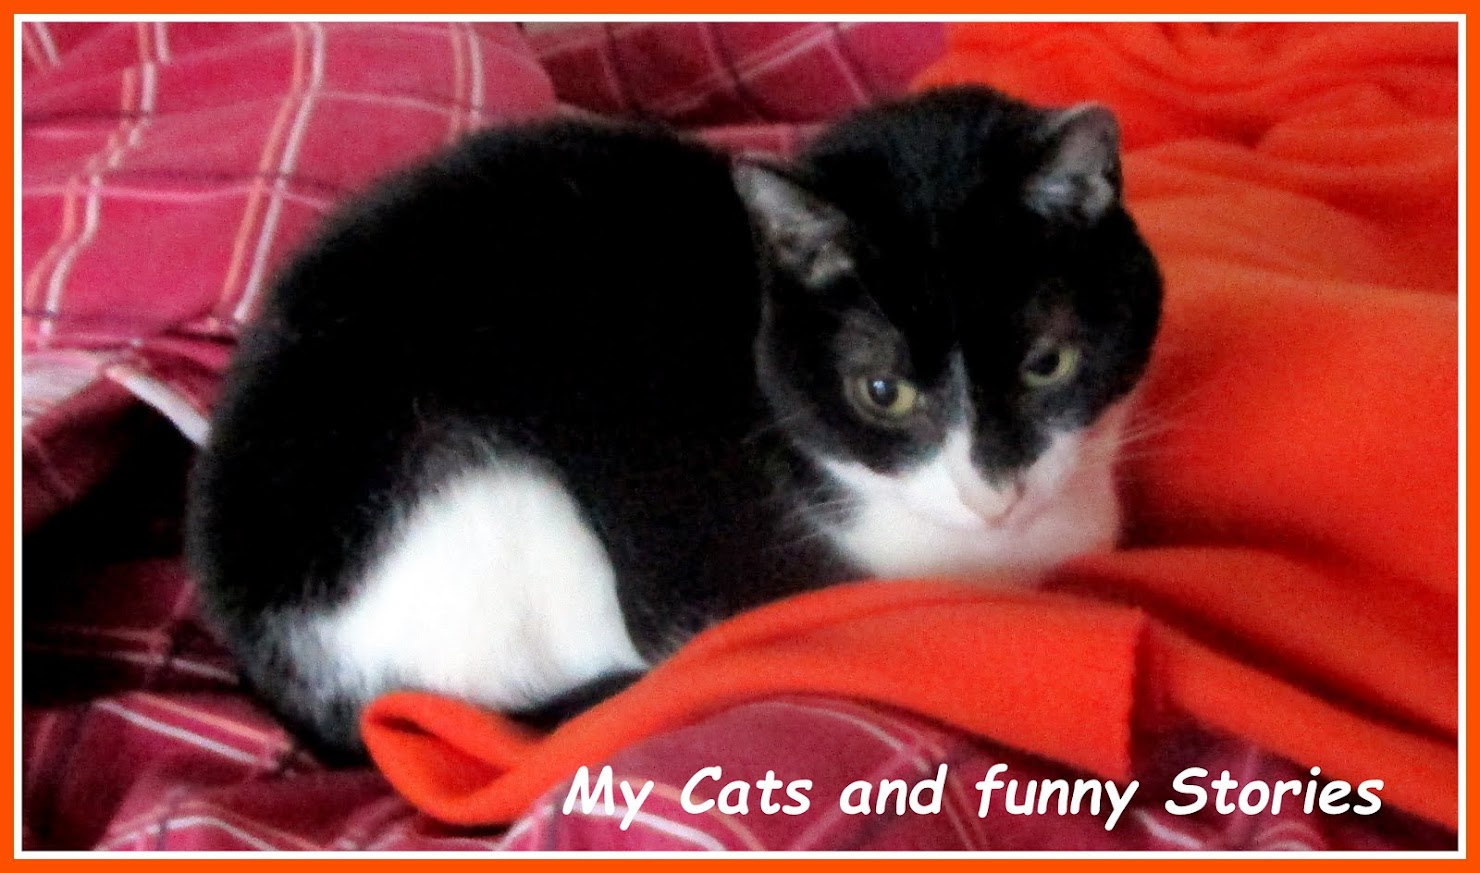 MY CATS AND FUNNY STORIES